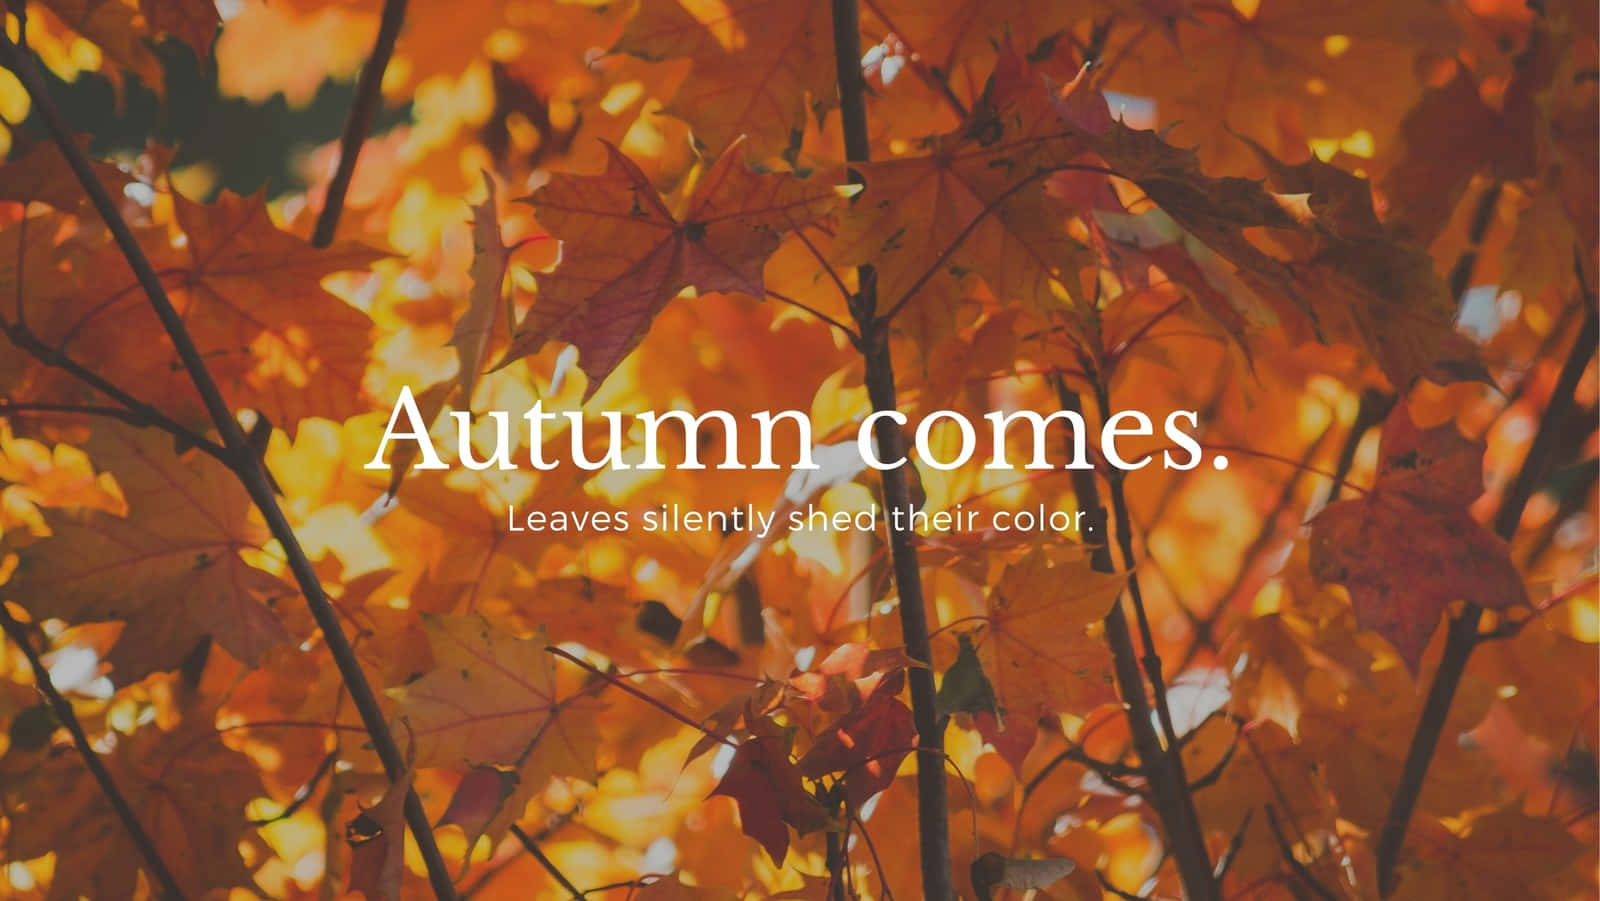 "Let's Celebrate Autumn in All Its Glorious Color"